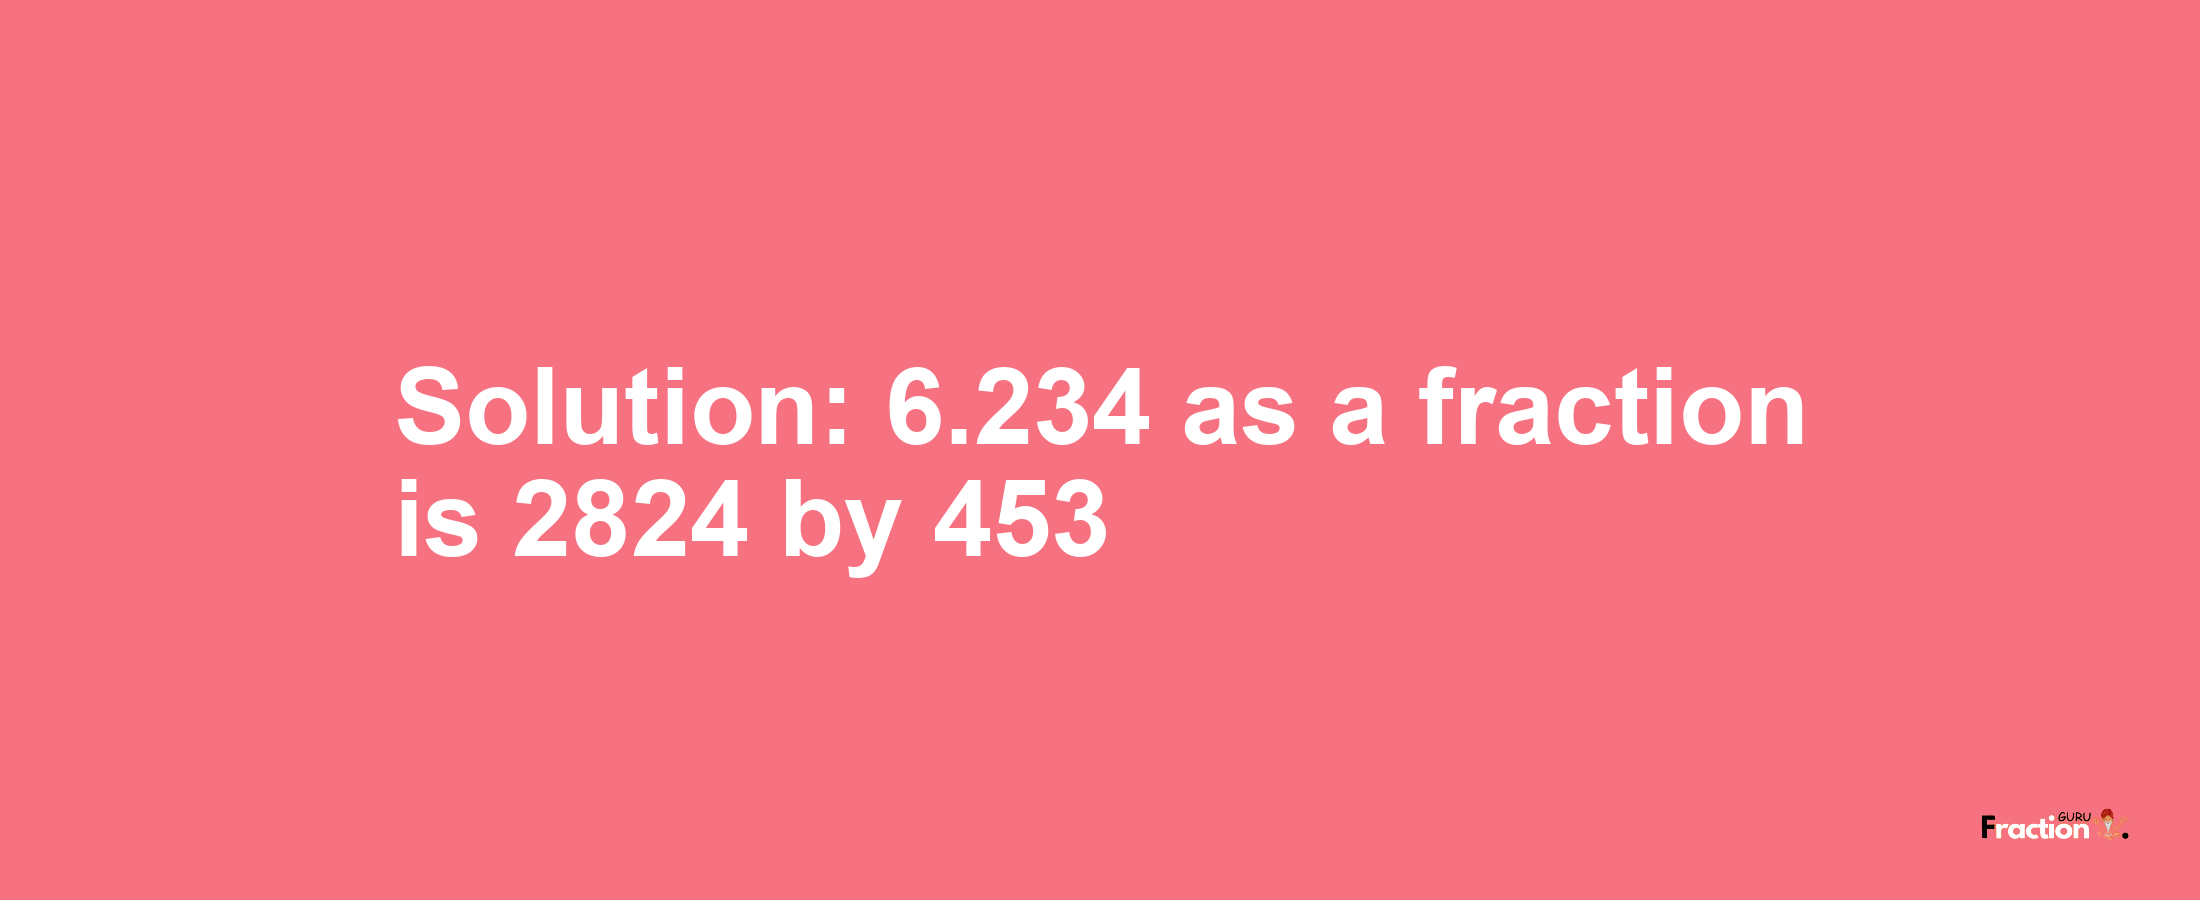 Solution:6.234 as a fraction is 2824/453